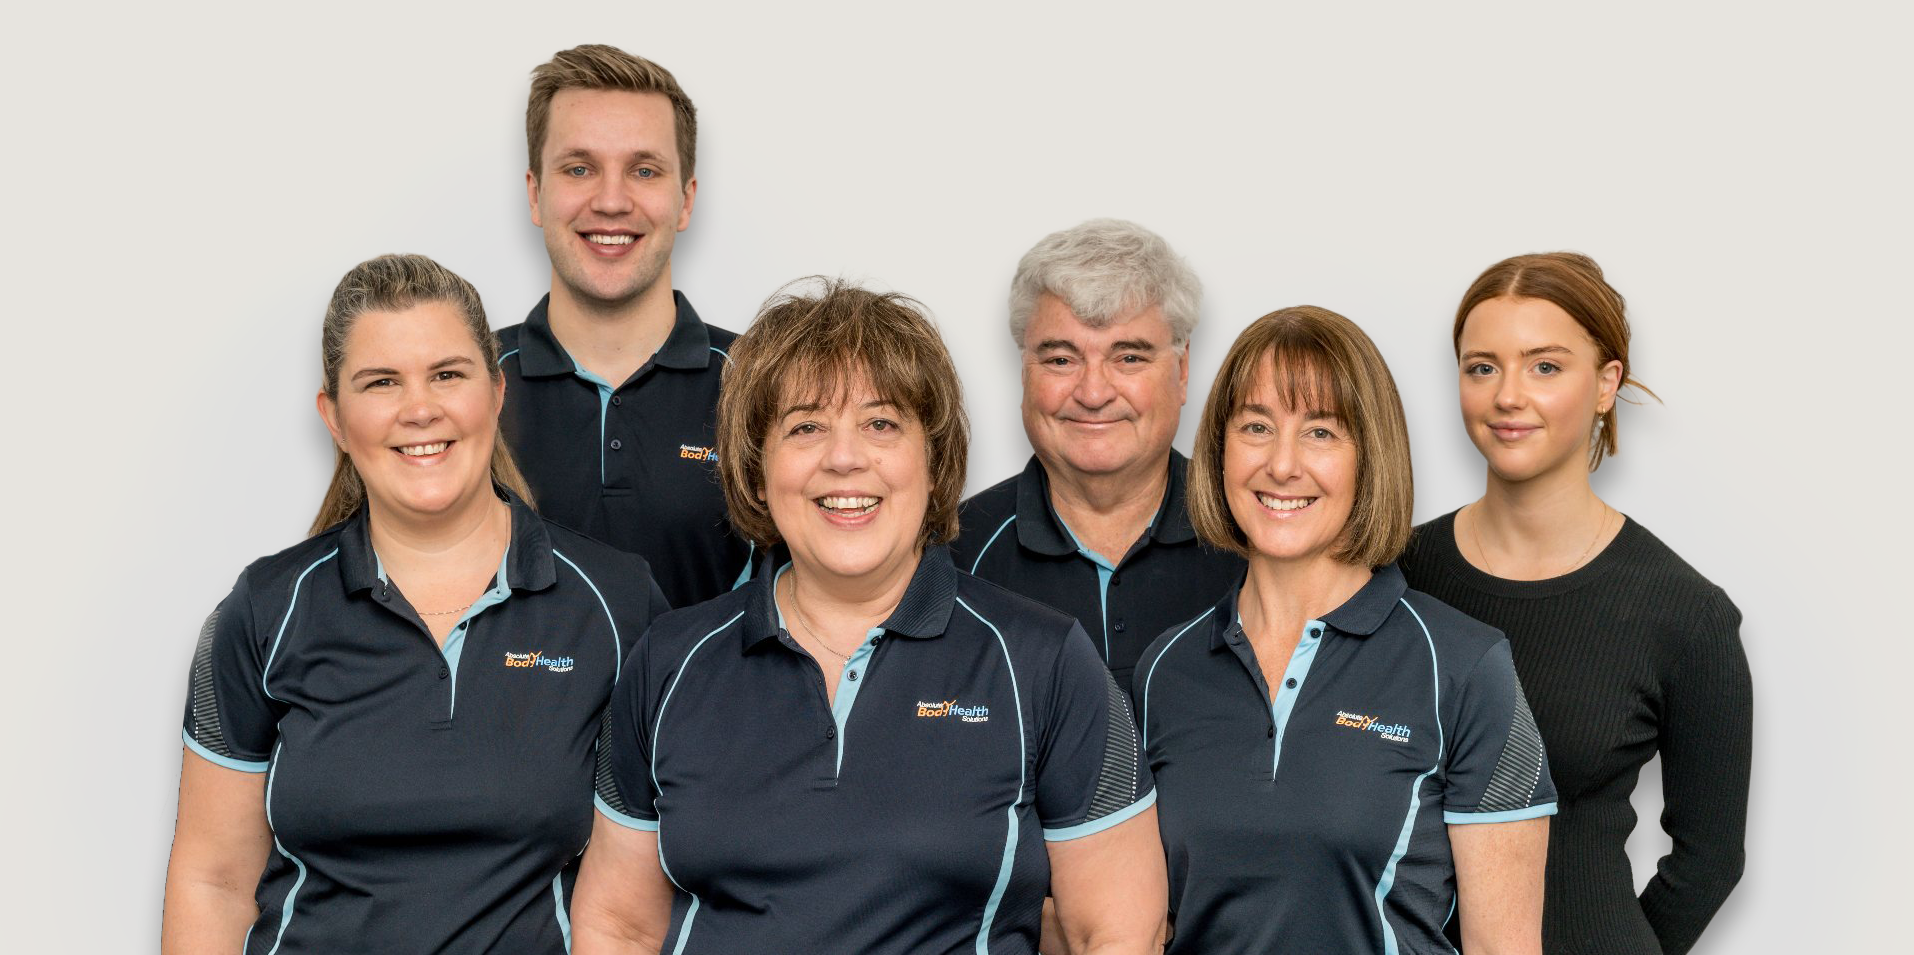 The Absolute Body Health Solutions team at their allied health care clinic in Bentleigh